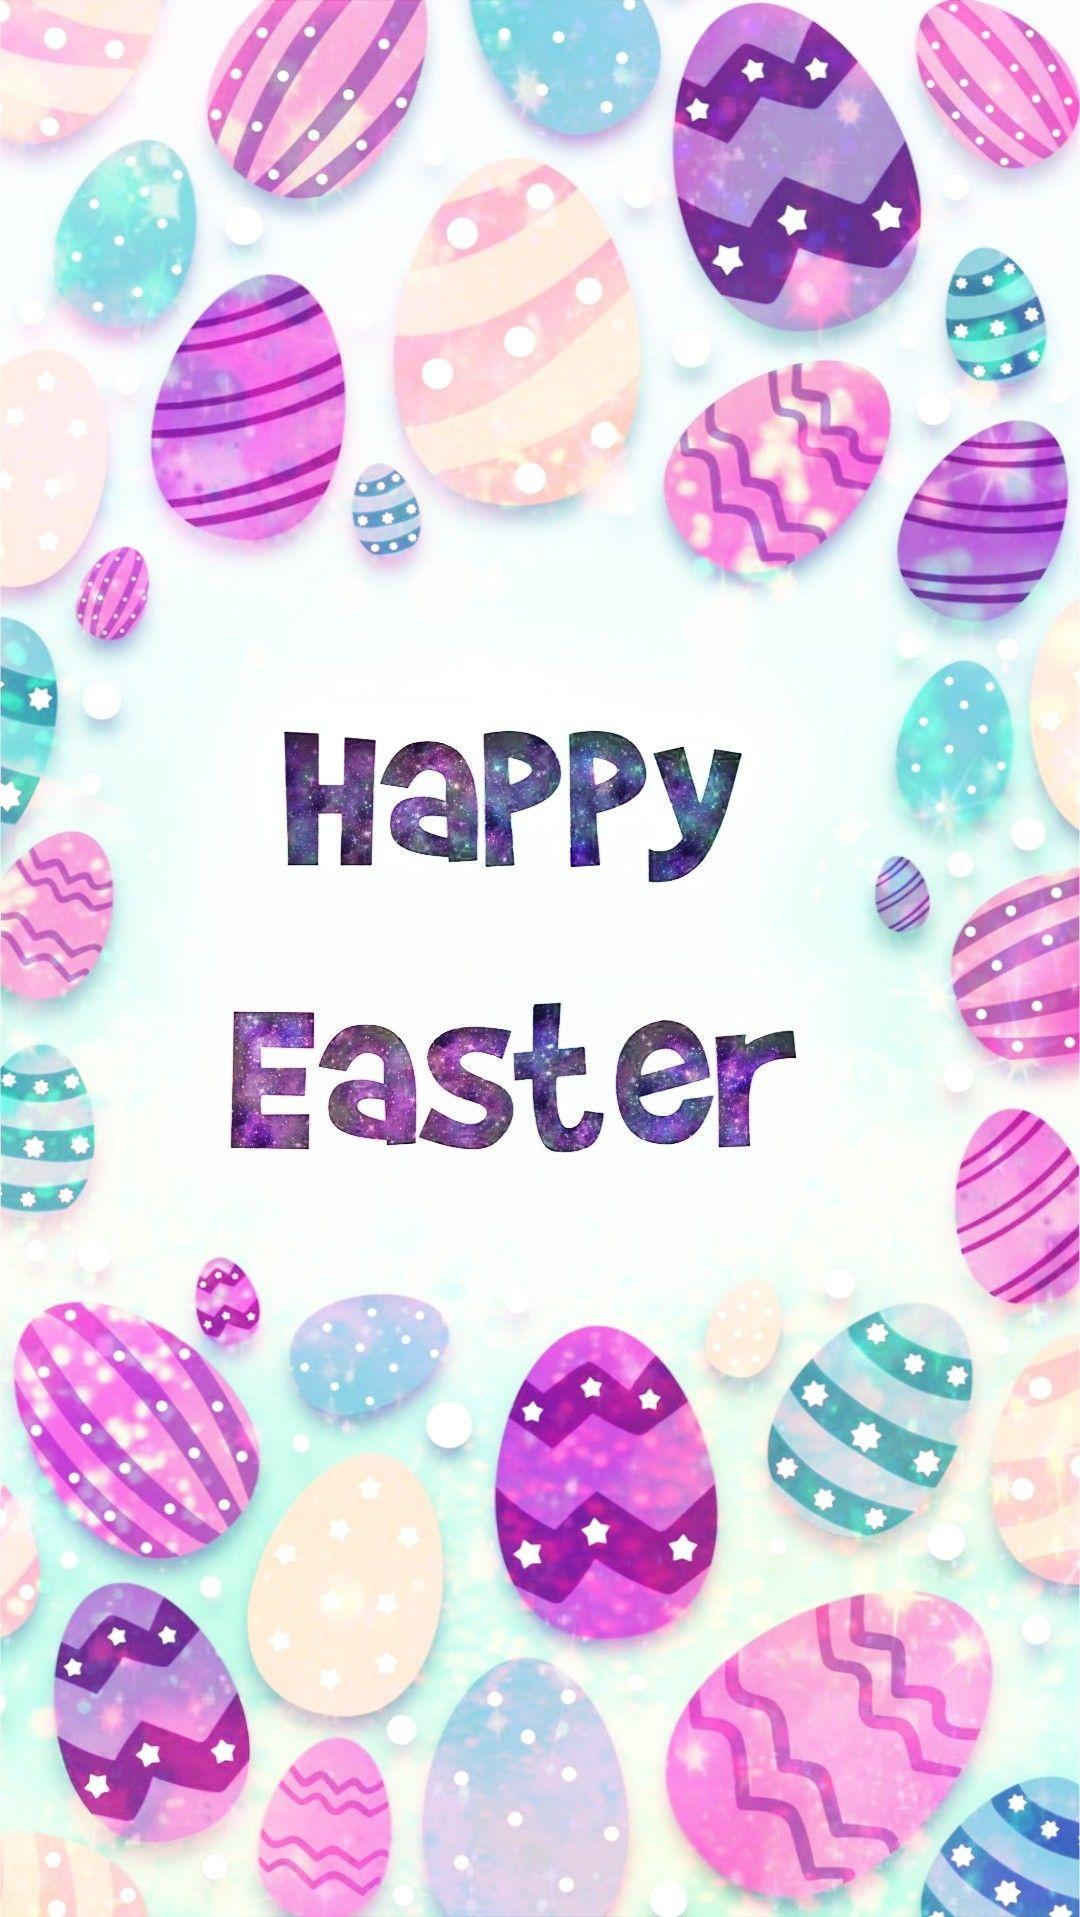 Glittery Happy Easter, made by me #patterns #purple #glitter #sparkles #galaxy #wallpaper. Easter wallpaper, Wallpaper iphone christmas, Happy easter wallpaper